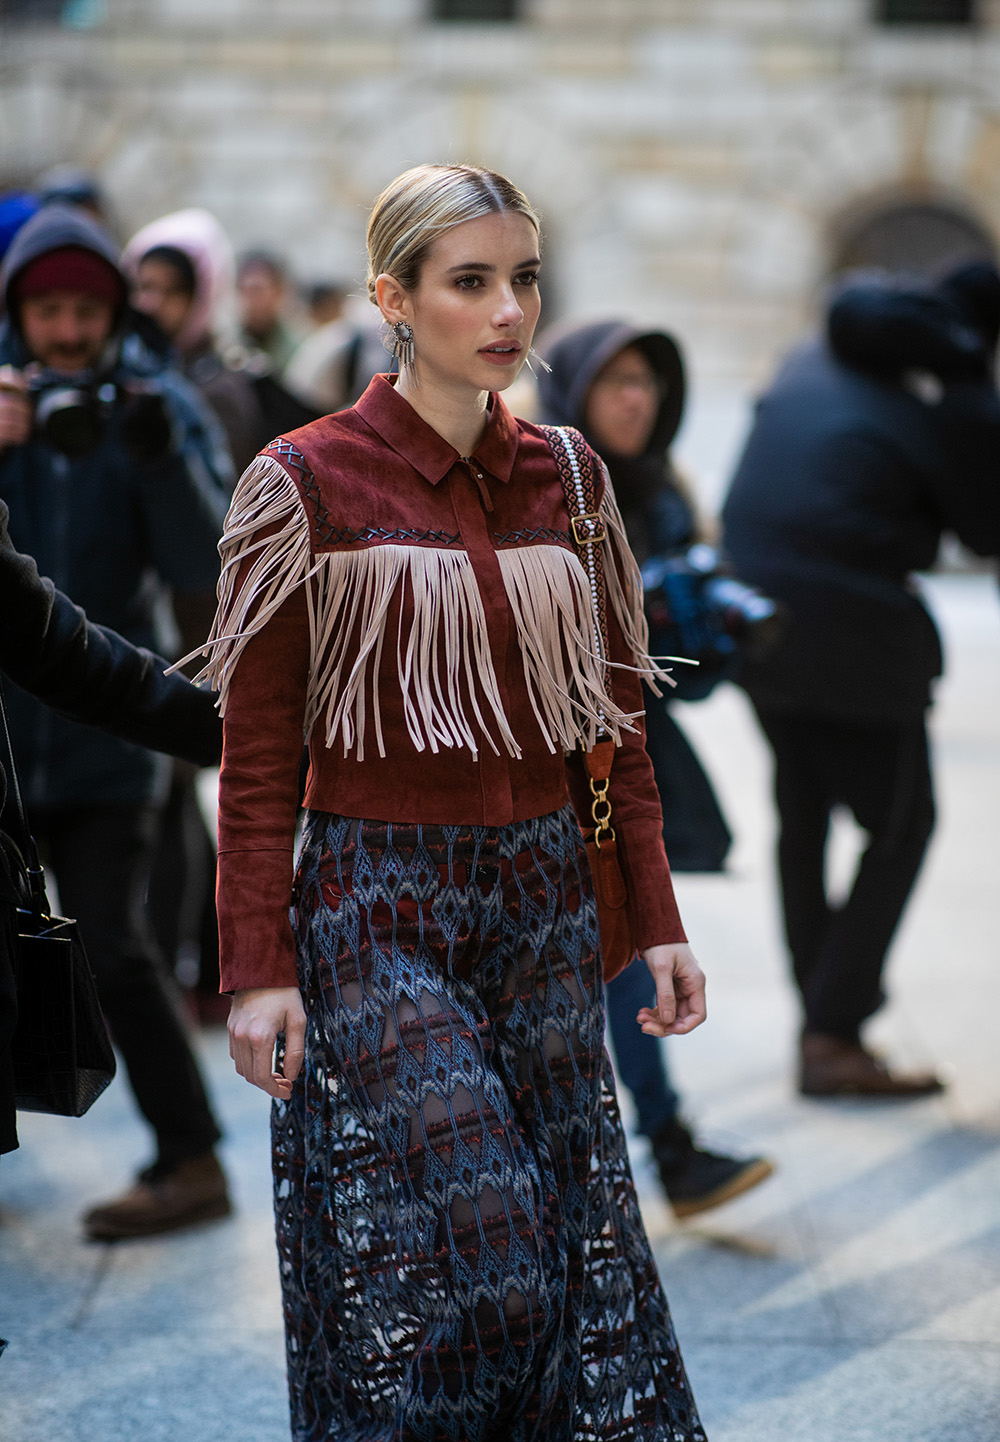 NEW YORK, NEW YORK - FEBRUARY 09: Emma Roberts is seen outside Longchamp during New York Fashion Week Autumn Winter 2019 on February 09, 2019 in New York City. (Photo by Christian Vierig/Getty Images)